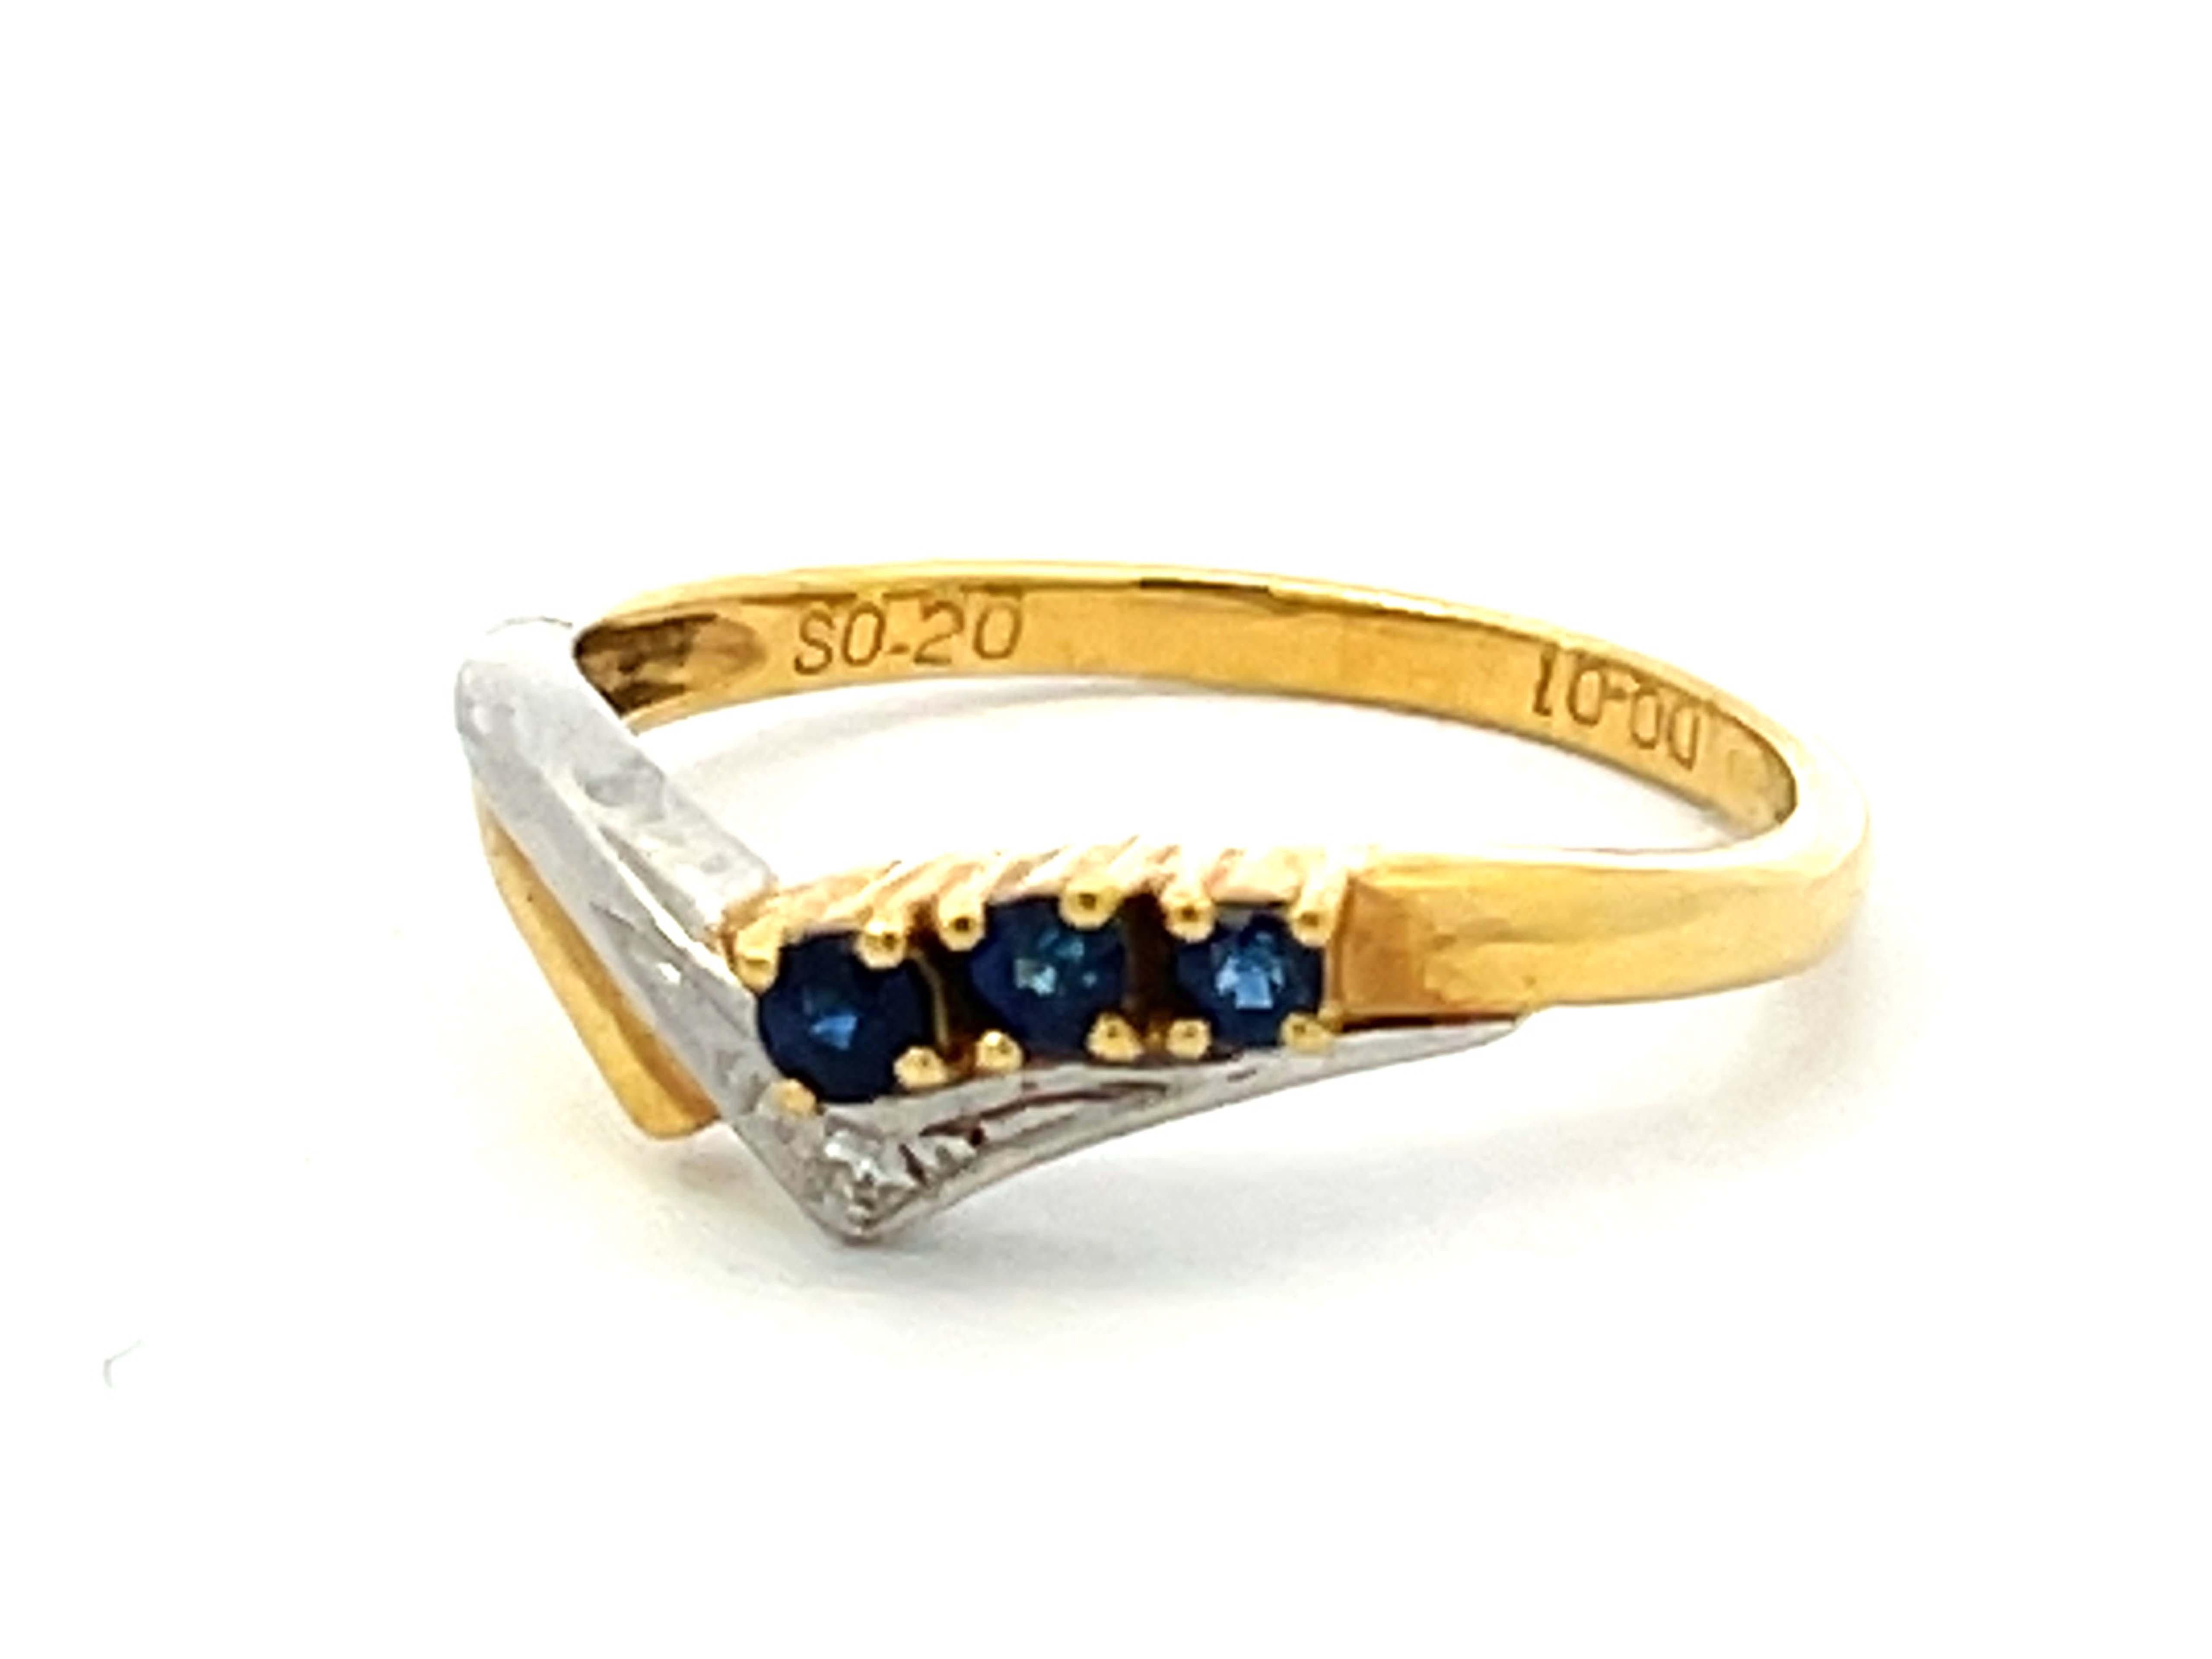 Two Toned V Shaped Sapphire and Diamond Ring in 18k Yellow Gold and Platinum In Excellent Condition For Sale In Honolulu, HI